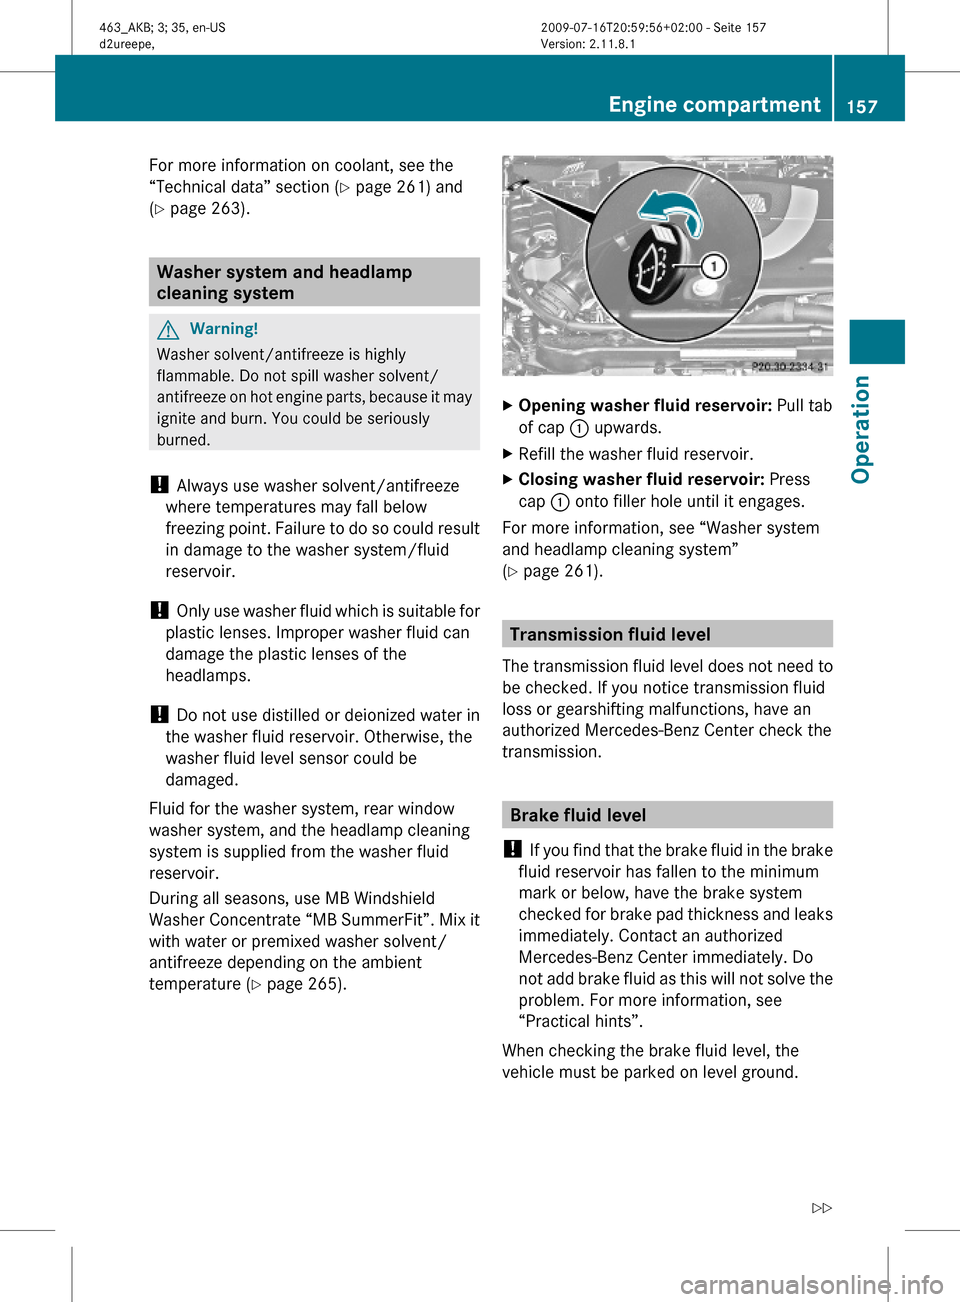 MERCEDES-BENZ G550 2010 W463 Owners Manual For more information on coolant, see the
“Technical data” section (Y page 261) and
(Y page 263).
Washer system and headlamp 
cleaning system
GWarning!
Washer solvent/antifreeze is highly
flammable